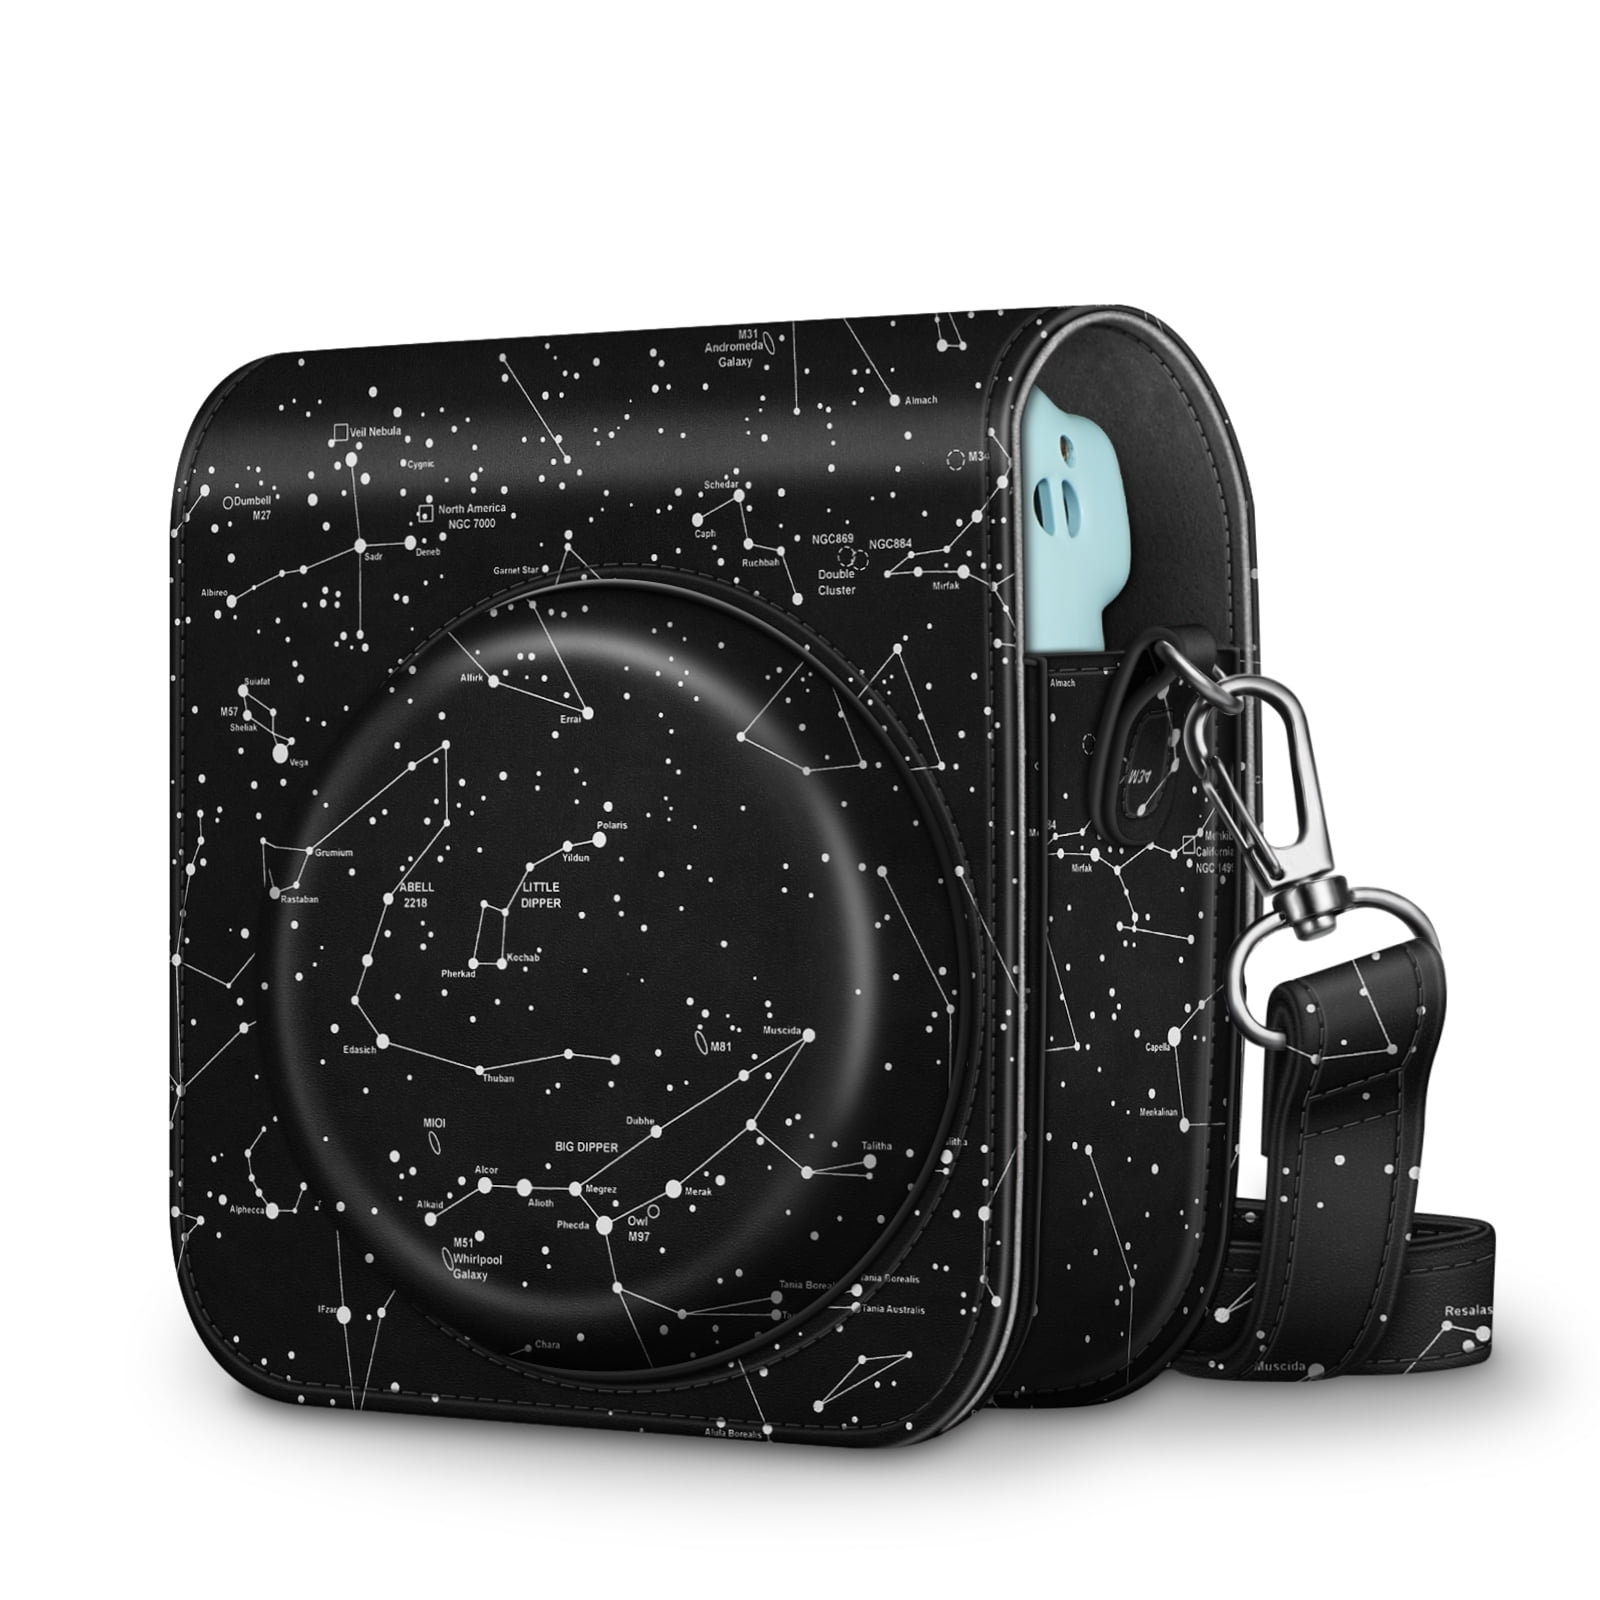 Fintie Protective Case for Fujifilm Instax Square SQ1 Instant Camera Clear Crystal Hard PVC Cover with Adjustable Removable Rainbow Shoulder Strap